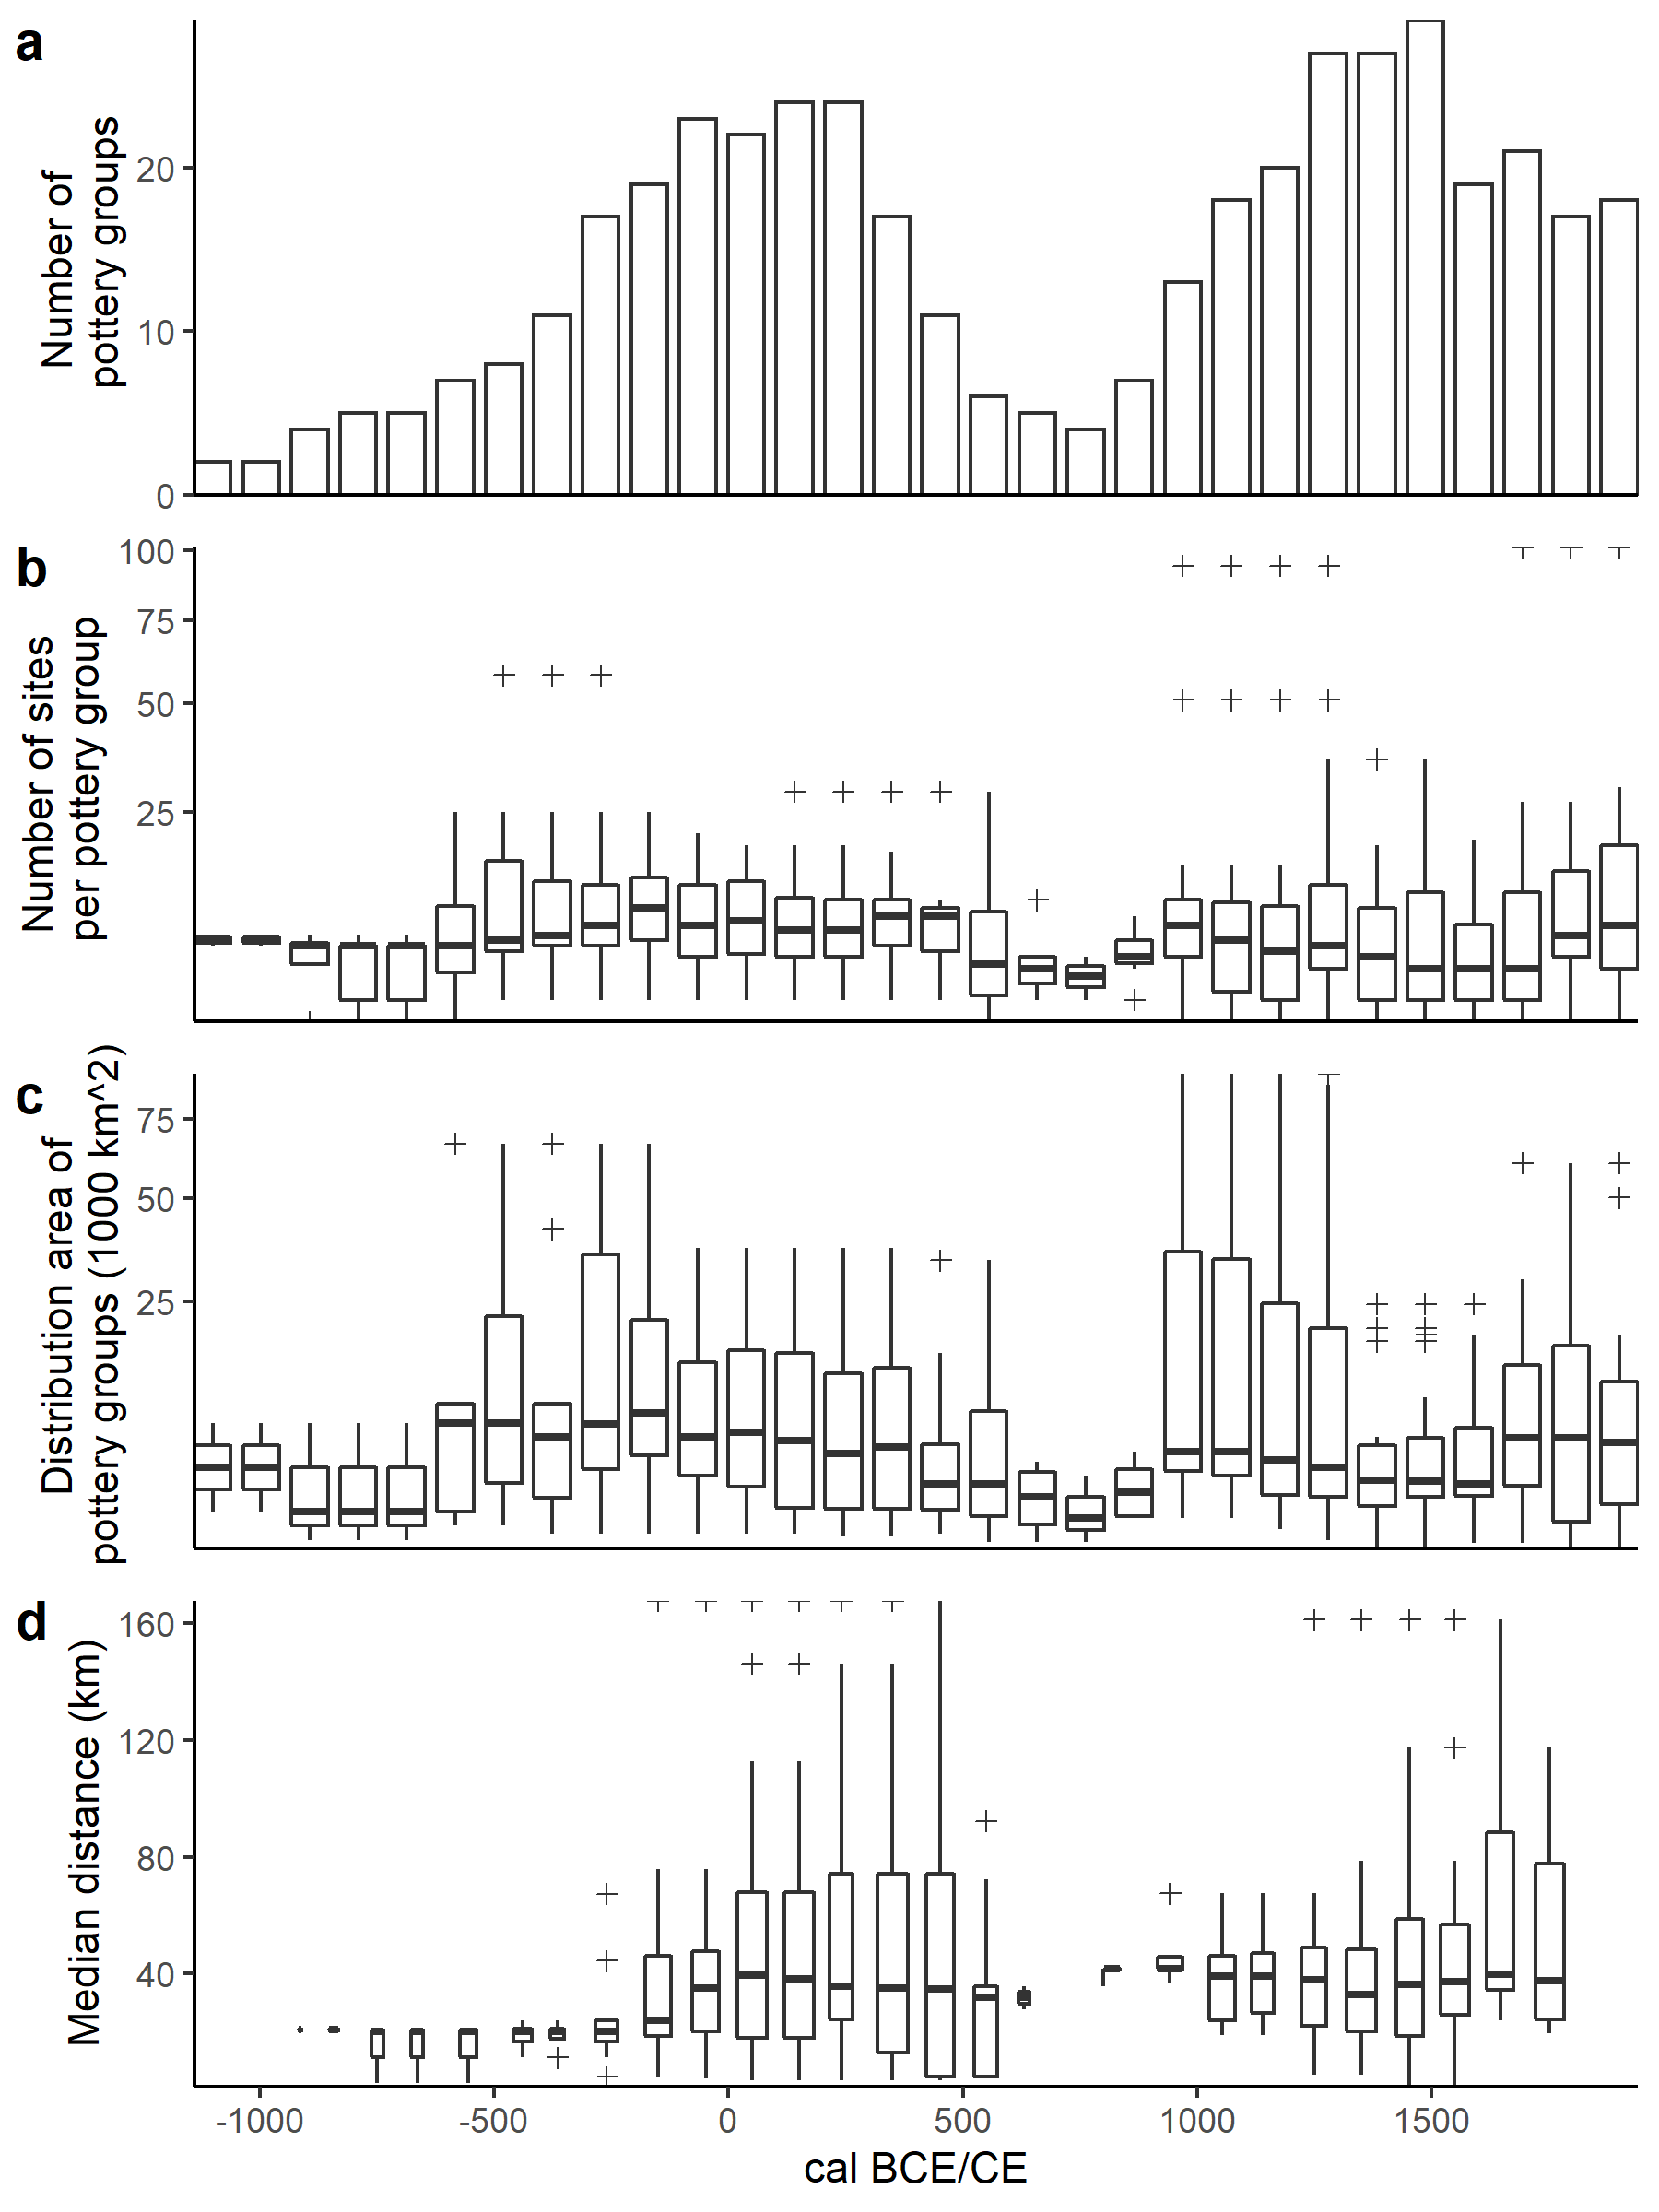 Fig. 1: Evolution of the numerical abundance and geographical distribution of pottery styles in the Congo rainforest over the past 3000 years (see Seidensticker et al. 2021: Fig. 3).